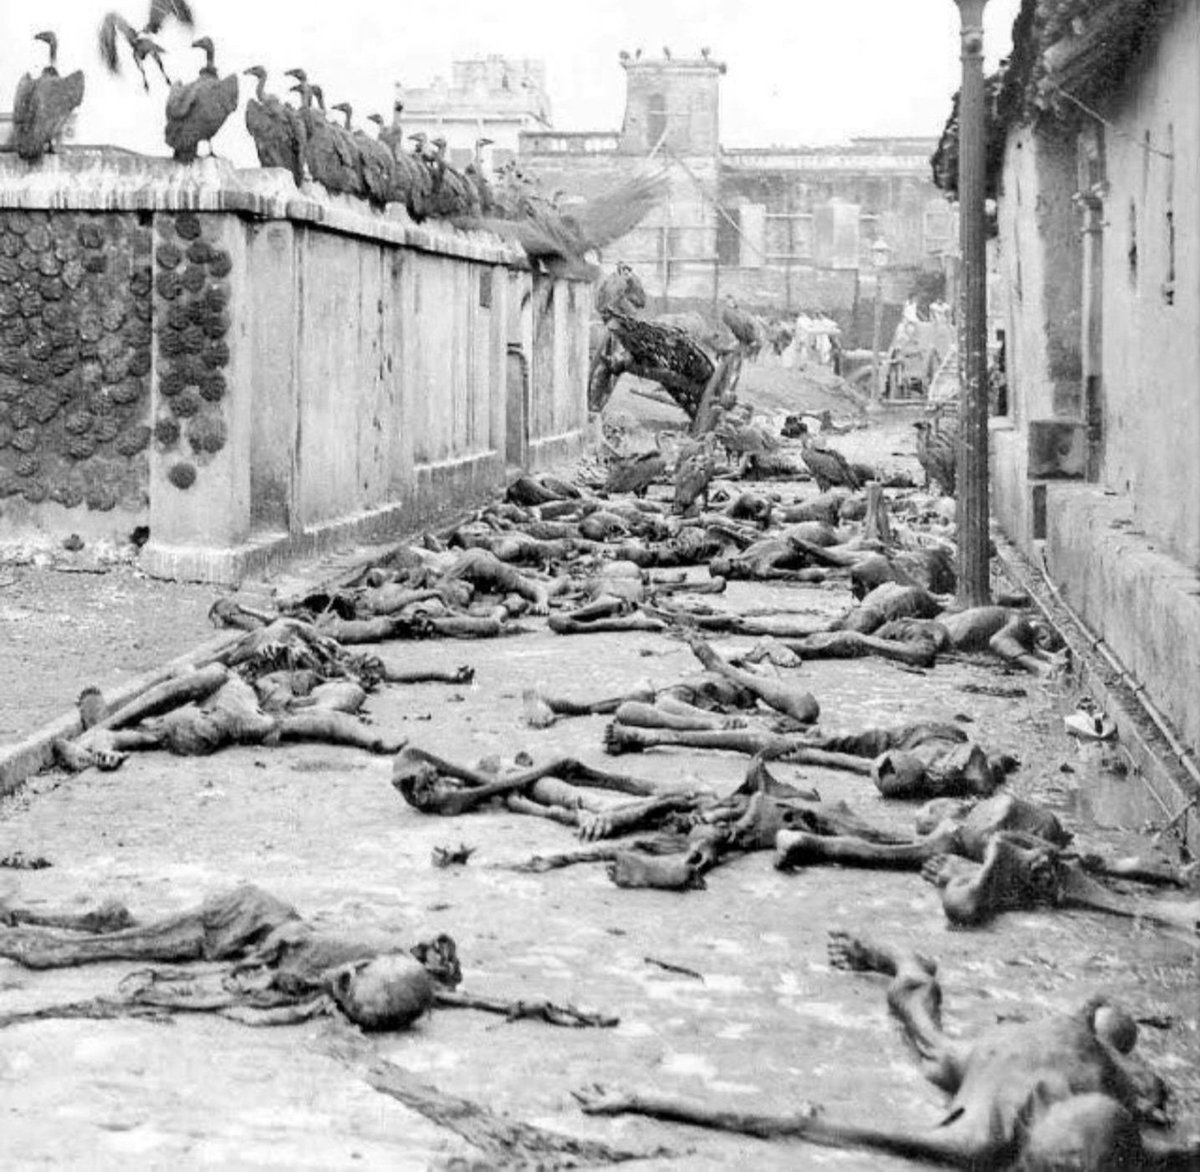 'Western values' 

4 million Indians starved to death in the Bengal Famines by the British in 1943.

All food was diverted to the allies during World War II.

Winston Churchill,who instigated the famine,voiced his contempt for Indian people, calling them 'a beastly people with a